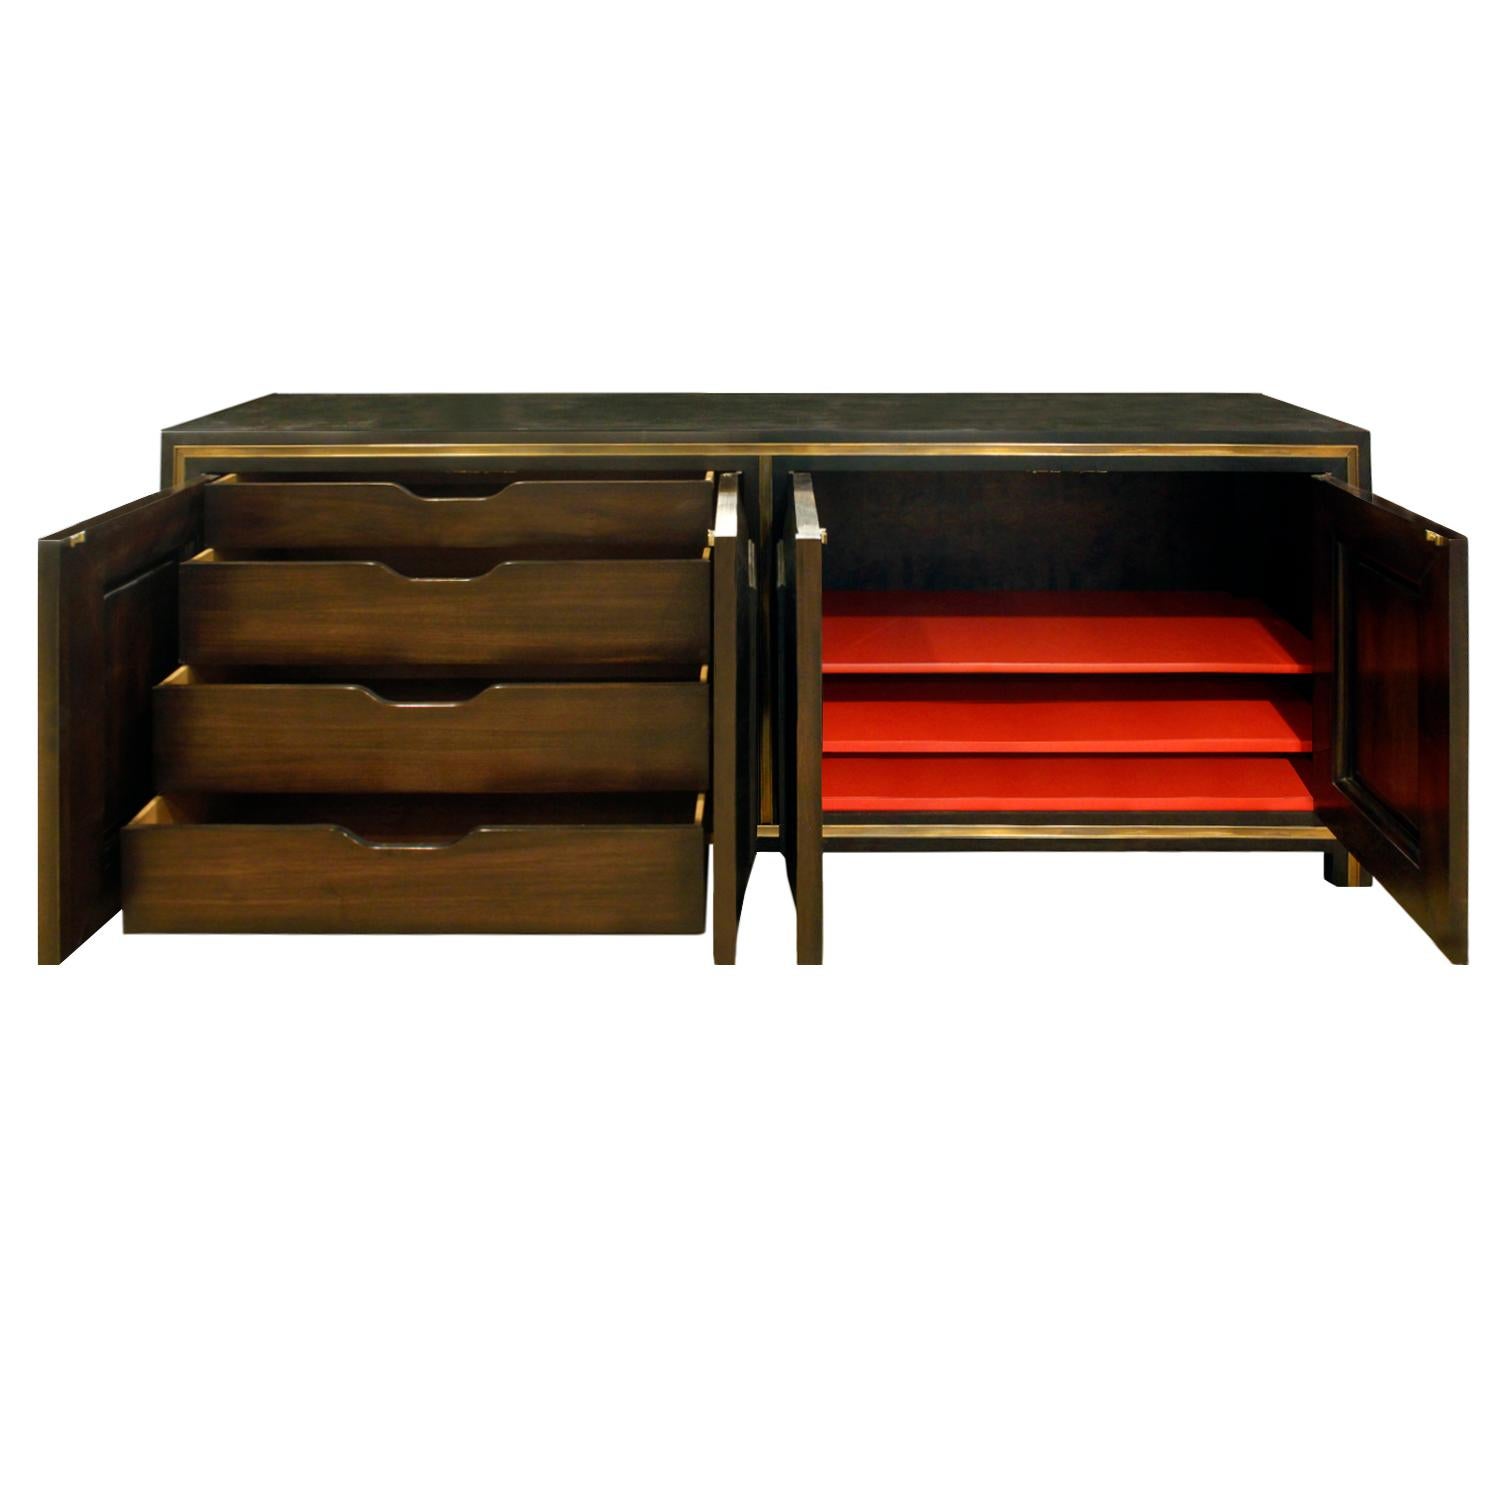 Hand-Crafted Mastercraft Chic Credenza in Dark Carpathian Elm and with Brass, 1960s